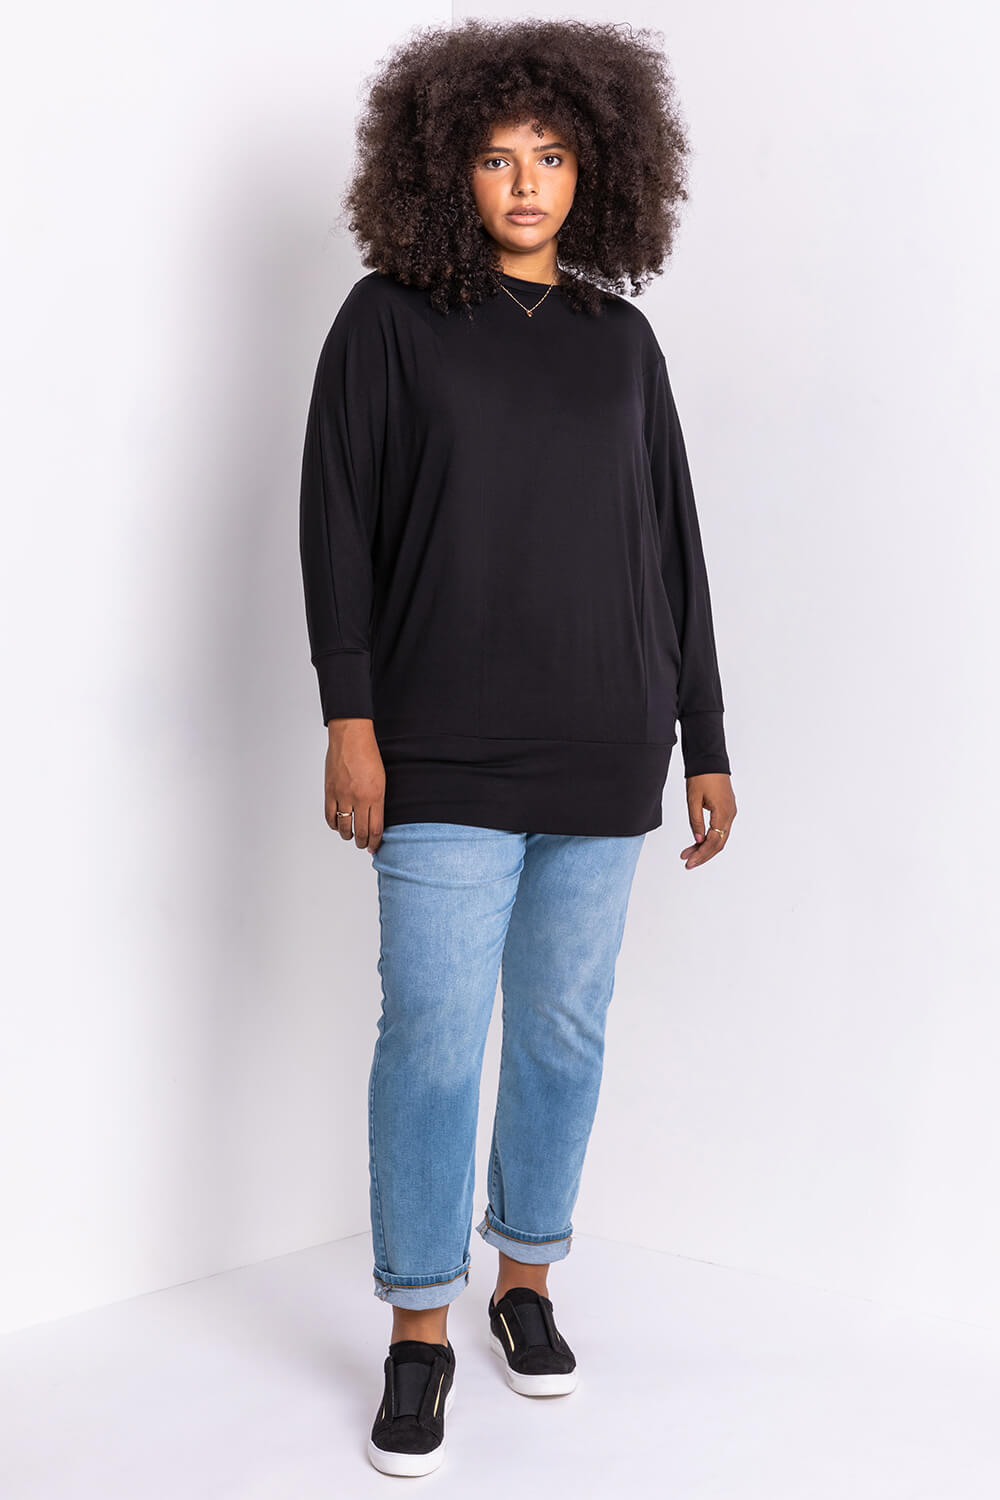 Black Curve Crew Neck Long Sleeve Top, Image 3 of 4